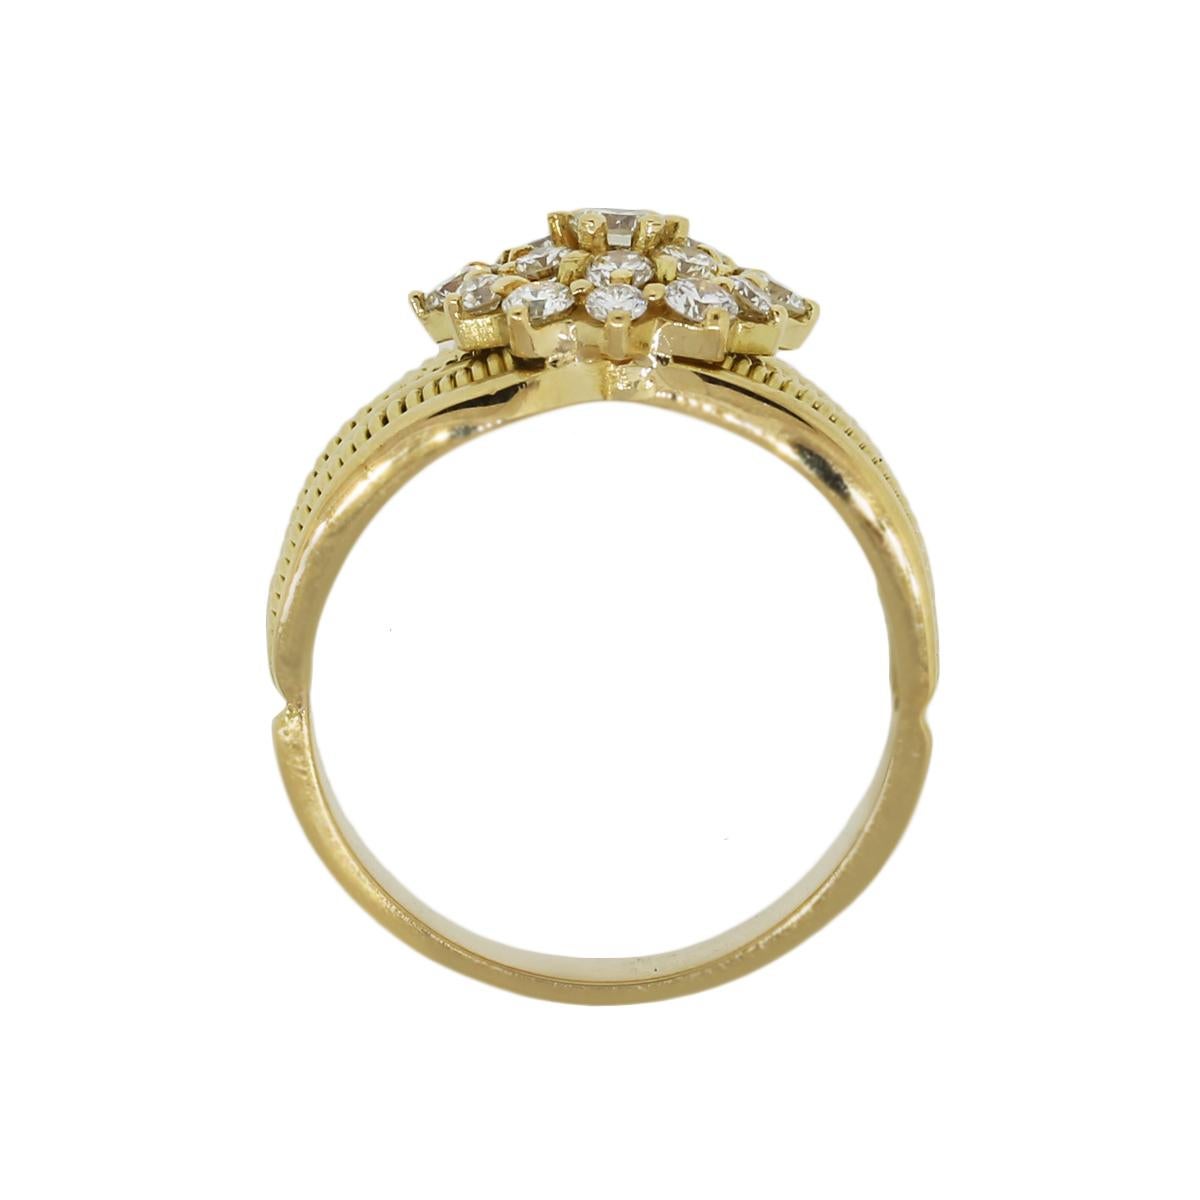 Material: 18k yellow gold
Diamond Details: Approximately 0.70ctw of round brilliant diamonds. Diamonds are G/H in color and VS in clarity
Ring Size: 8.25
Ring Measurements: 1″ x 0.48″ x 0.84″
Total Weight: 10.8g (6.9dwt)
Additional Details: This